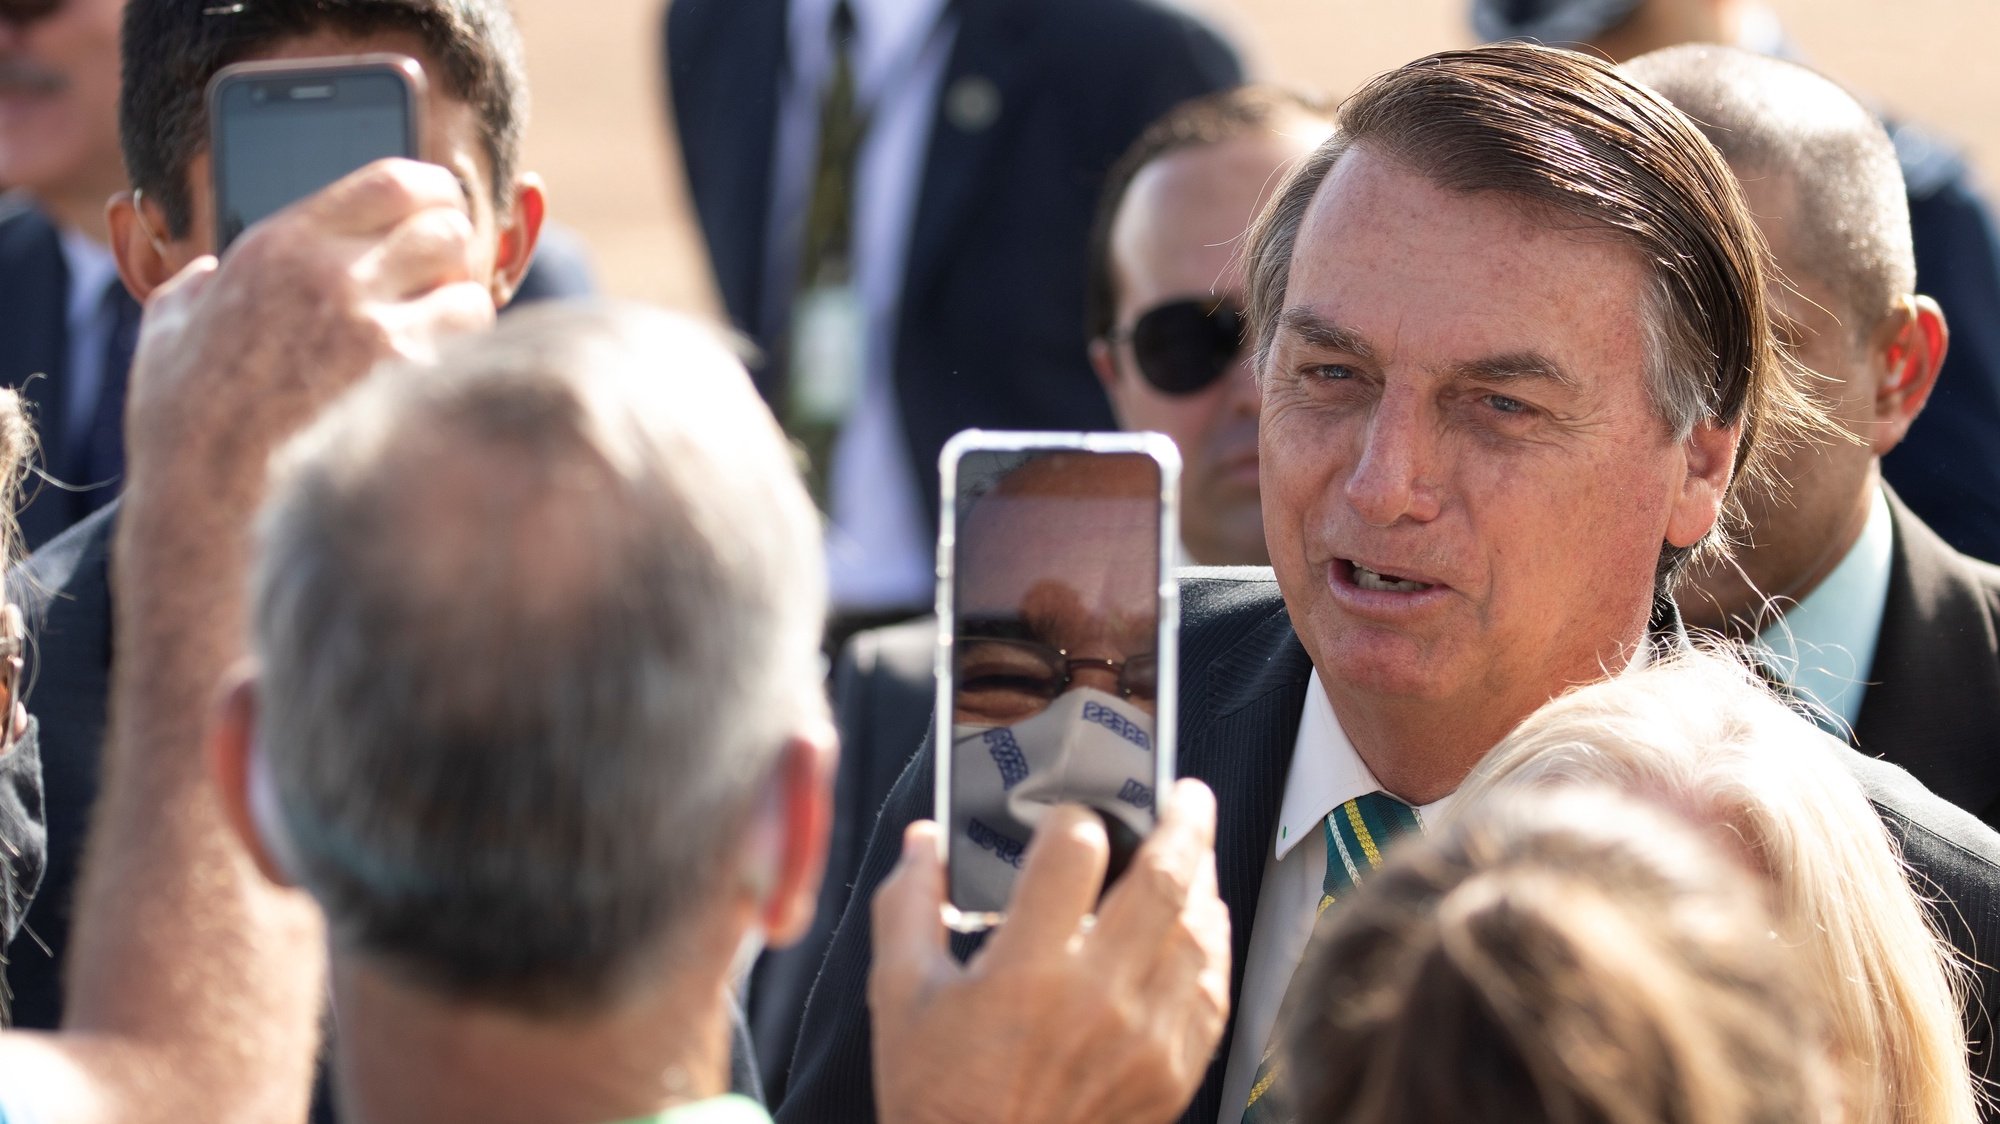 epa08777584 Brazilian President Jair Bolsonaro (C) poses for photos with his followers during the raising of the National Flag before the 38th Meeting of the Governing Council, at the Palace of the Alvorada, in Brasilia, Brazil, 27 October 2020.  EPA/Joedson Alves